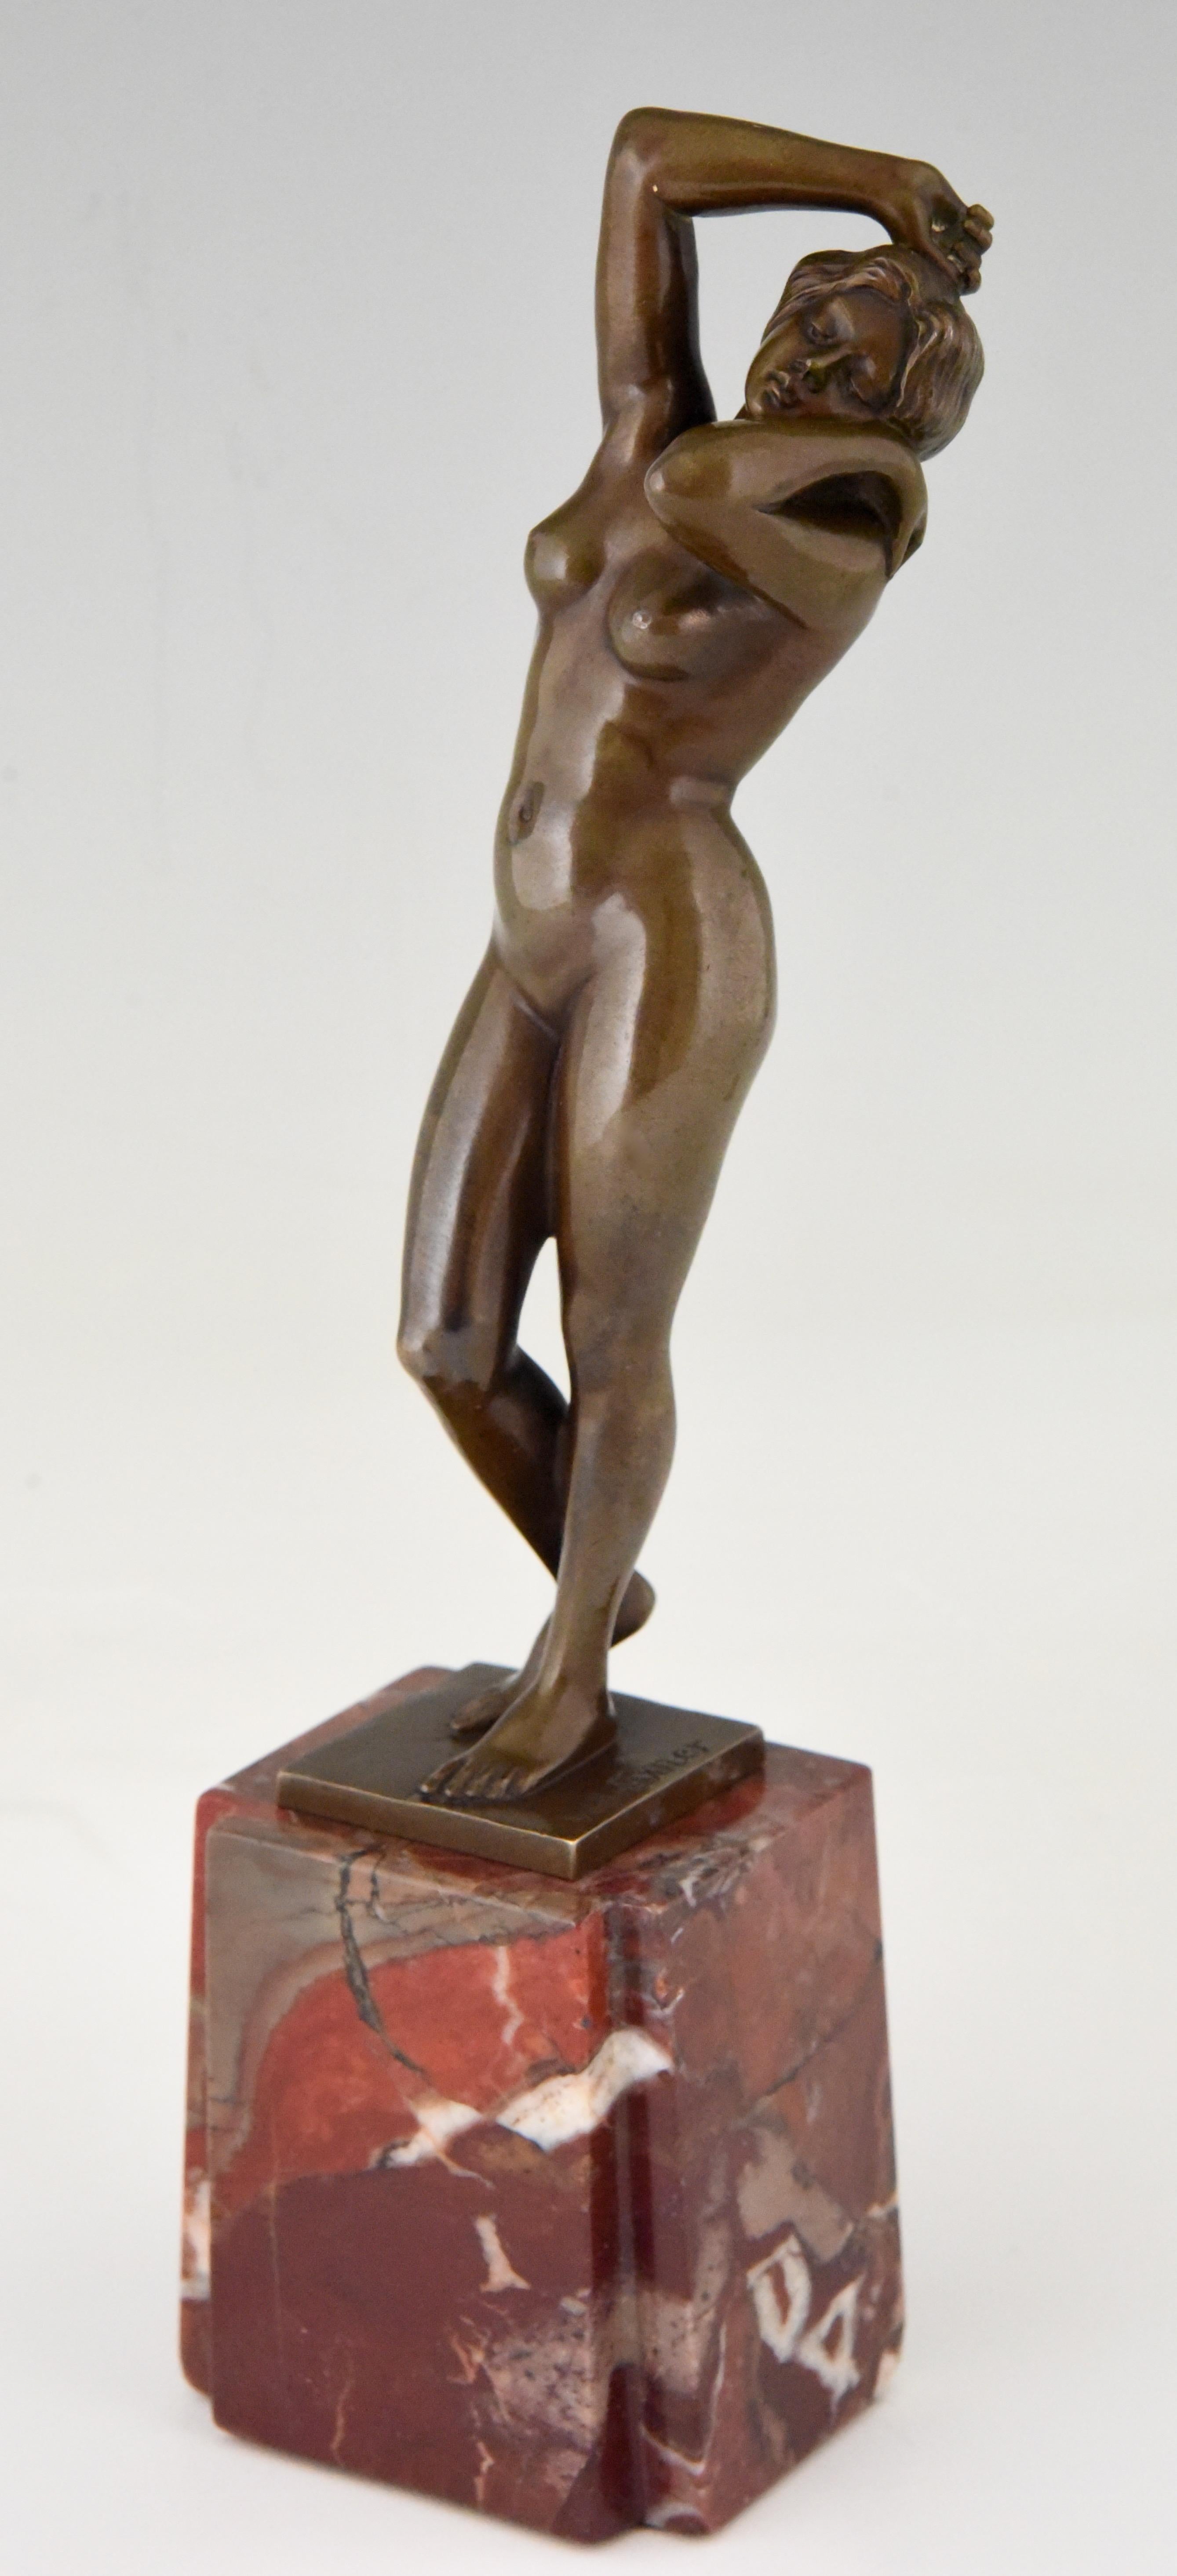 Art Nouveau bronze sculpture of a standing nude. The bronze is signed by the German artist Willi Exner and stands on a marble base, circa 1910.